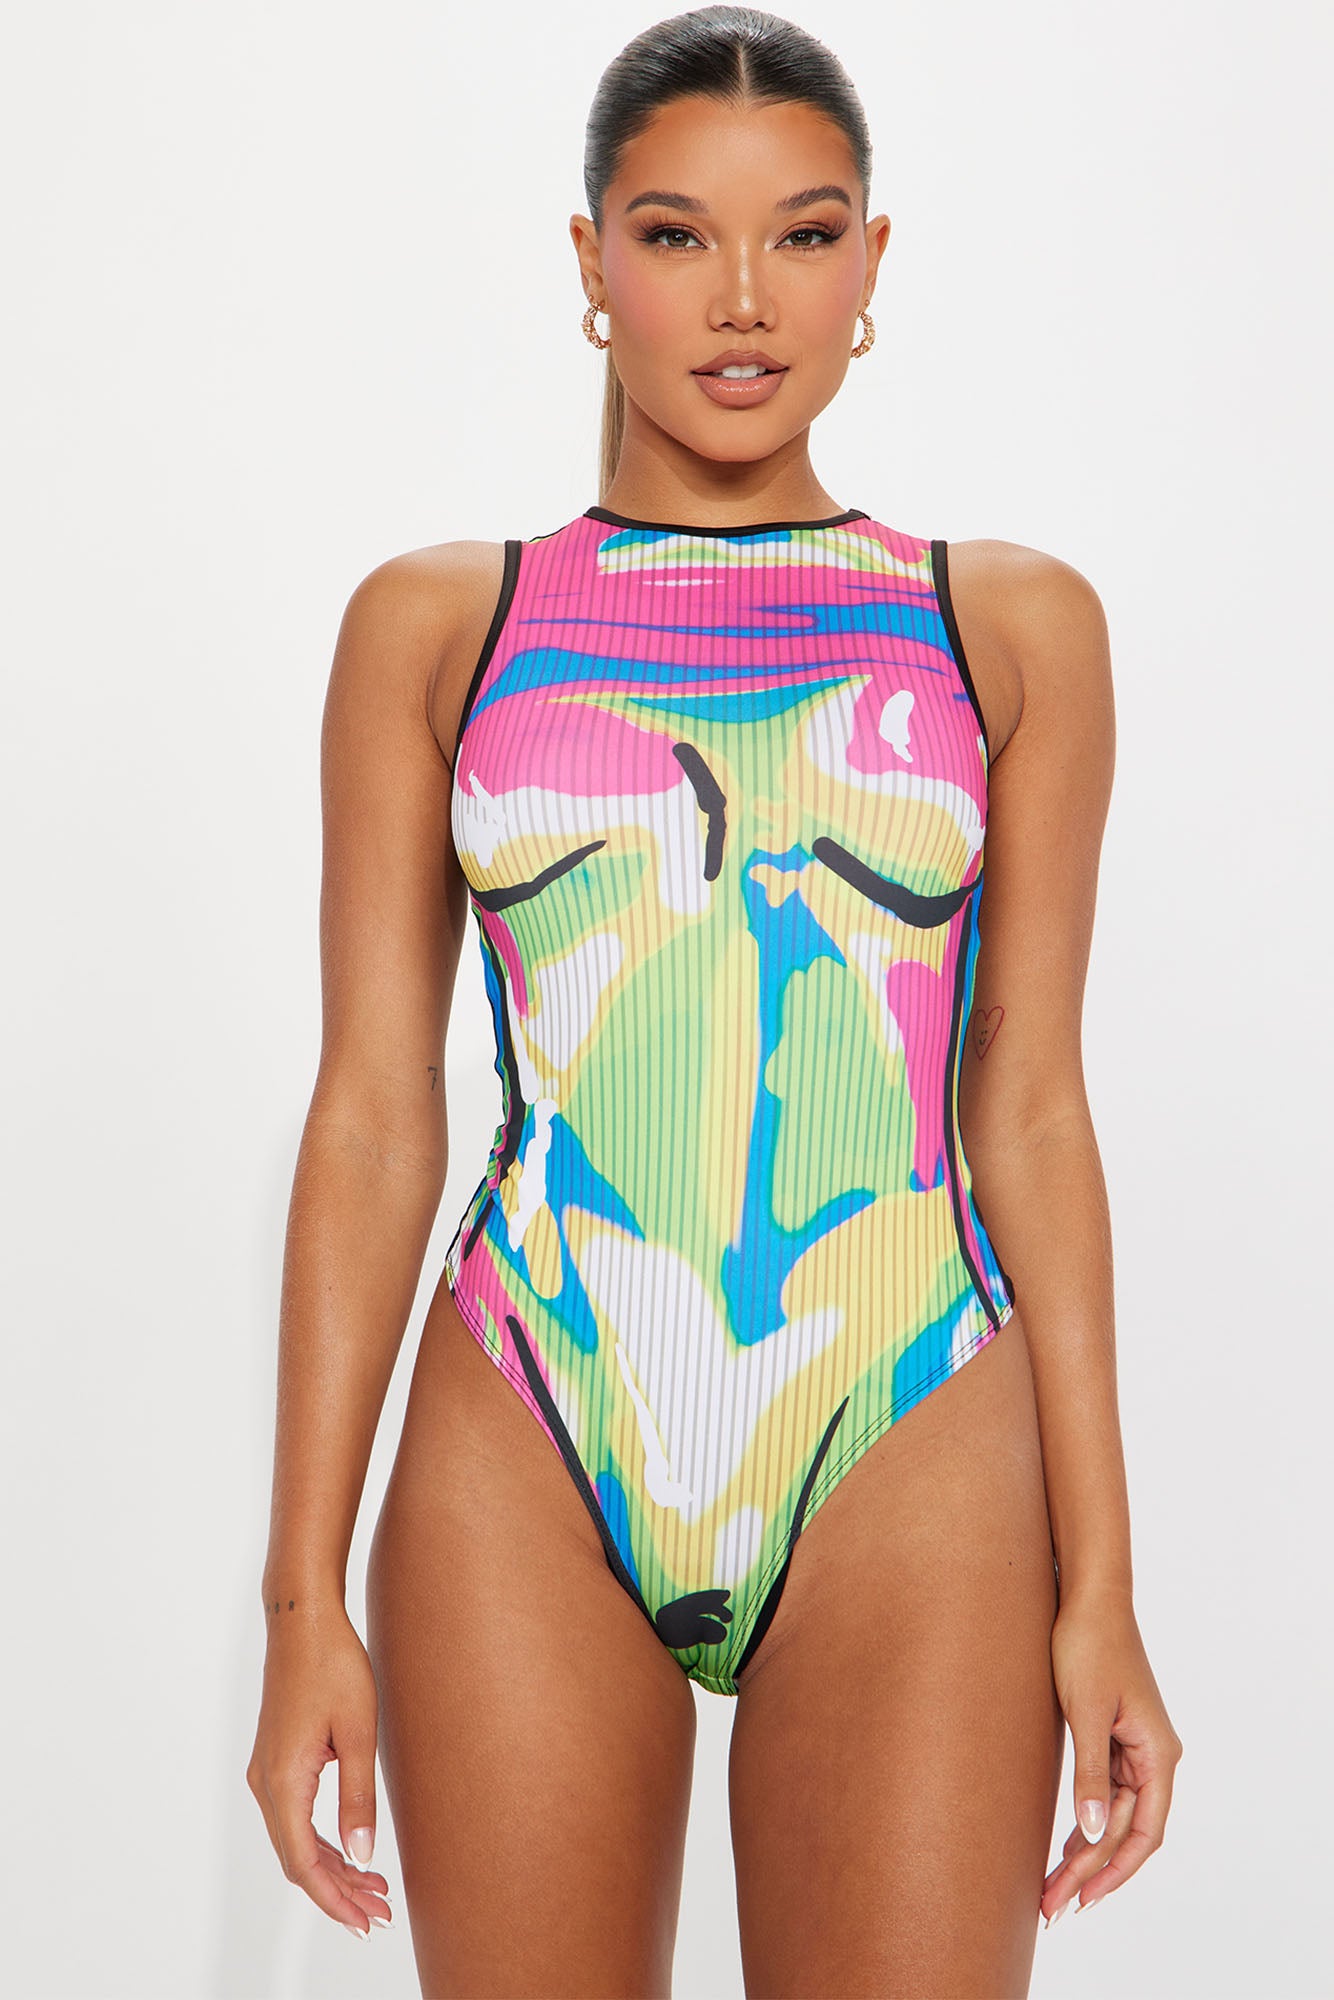 She's Out Of Control Bodysuit - Multi Color